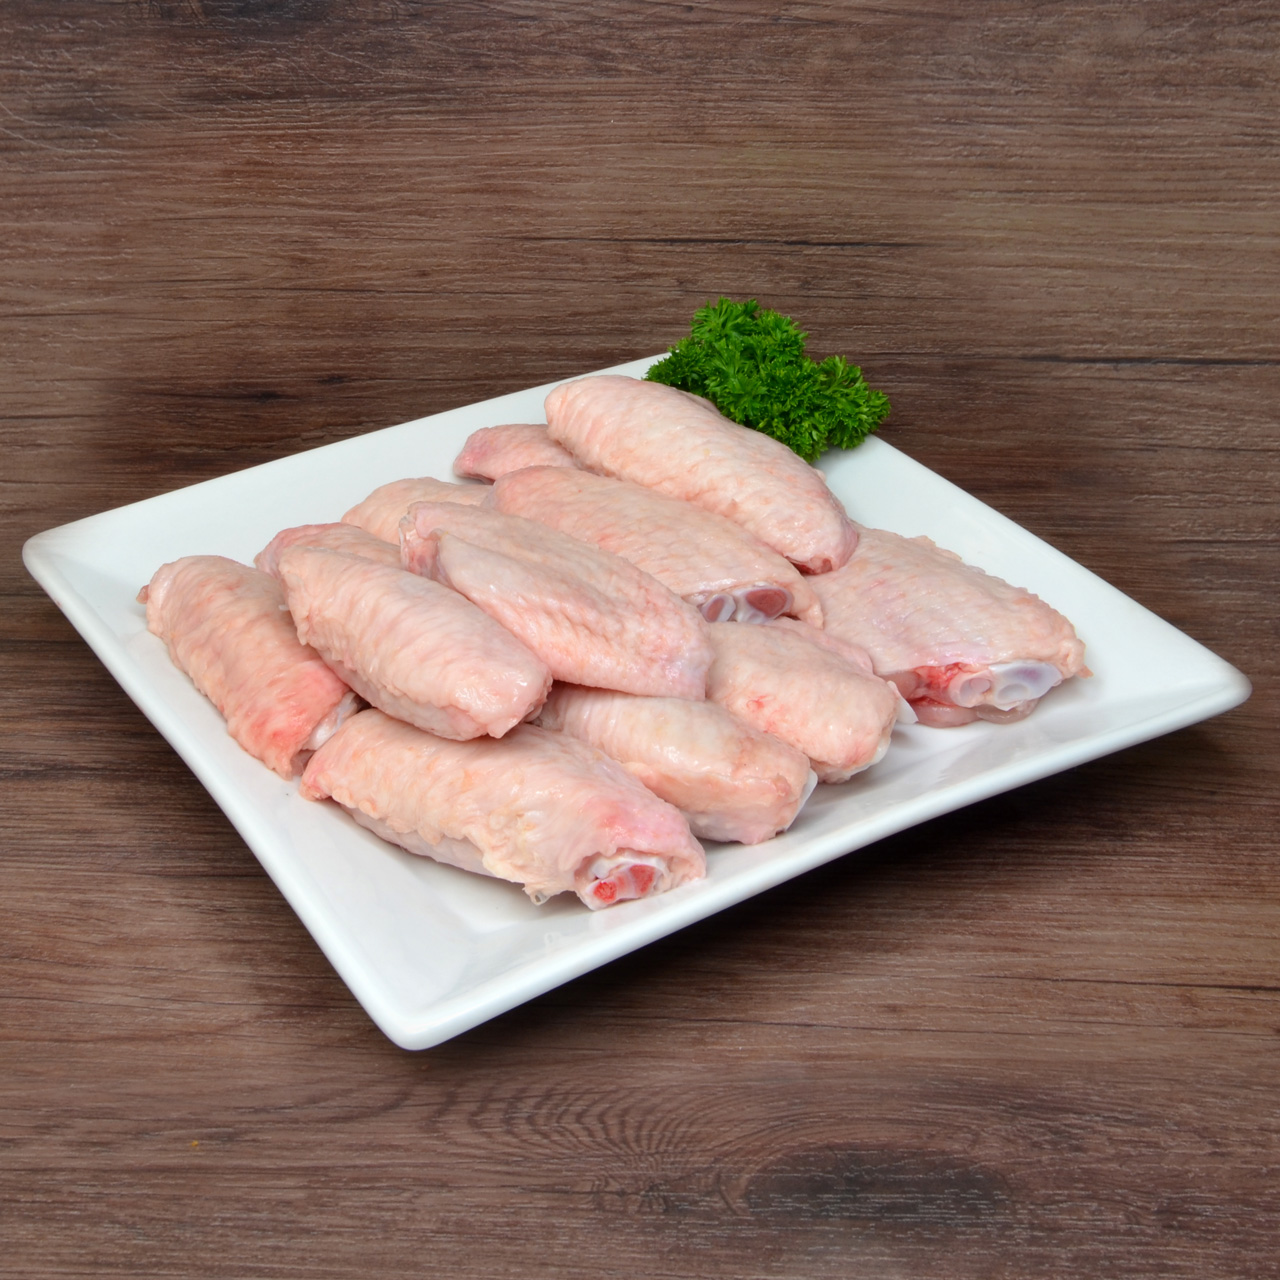 Chicken, Poultry and Chicken Pieces fresh daily in Melbourne 